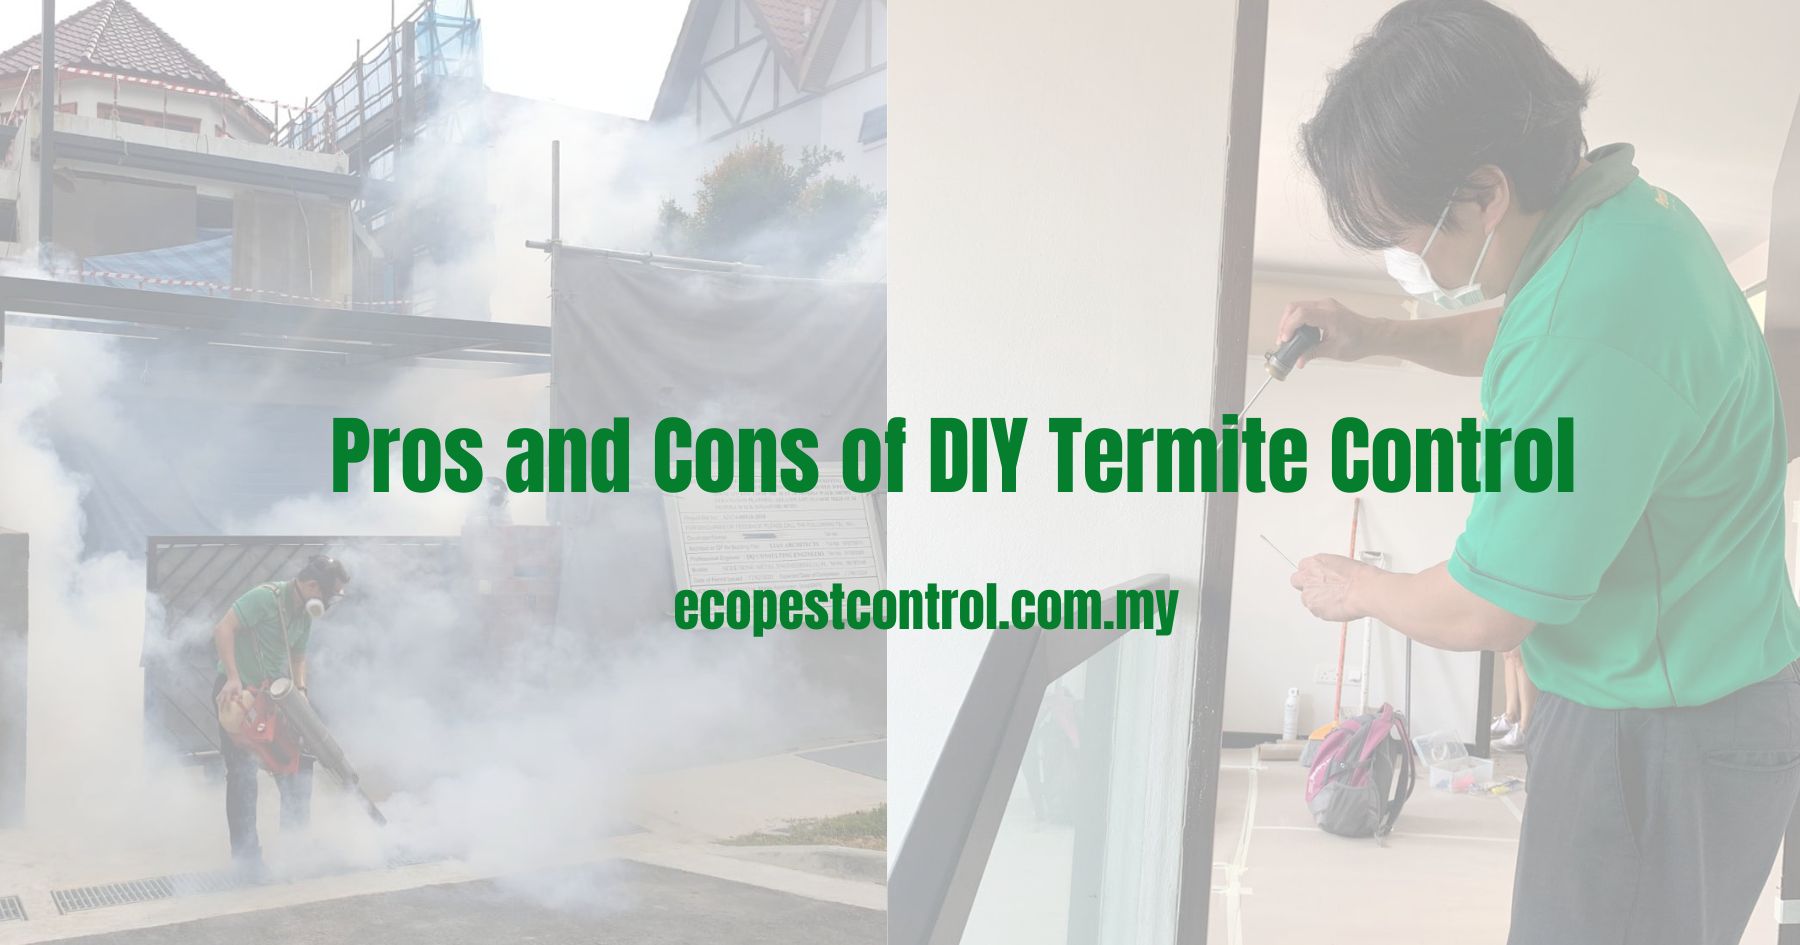 Pros and Cons of DIY Termite Control